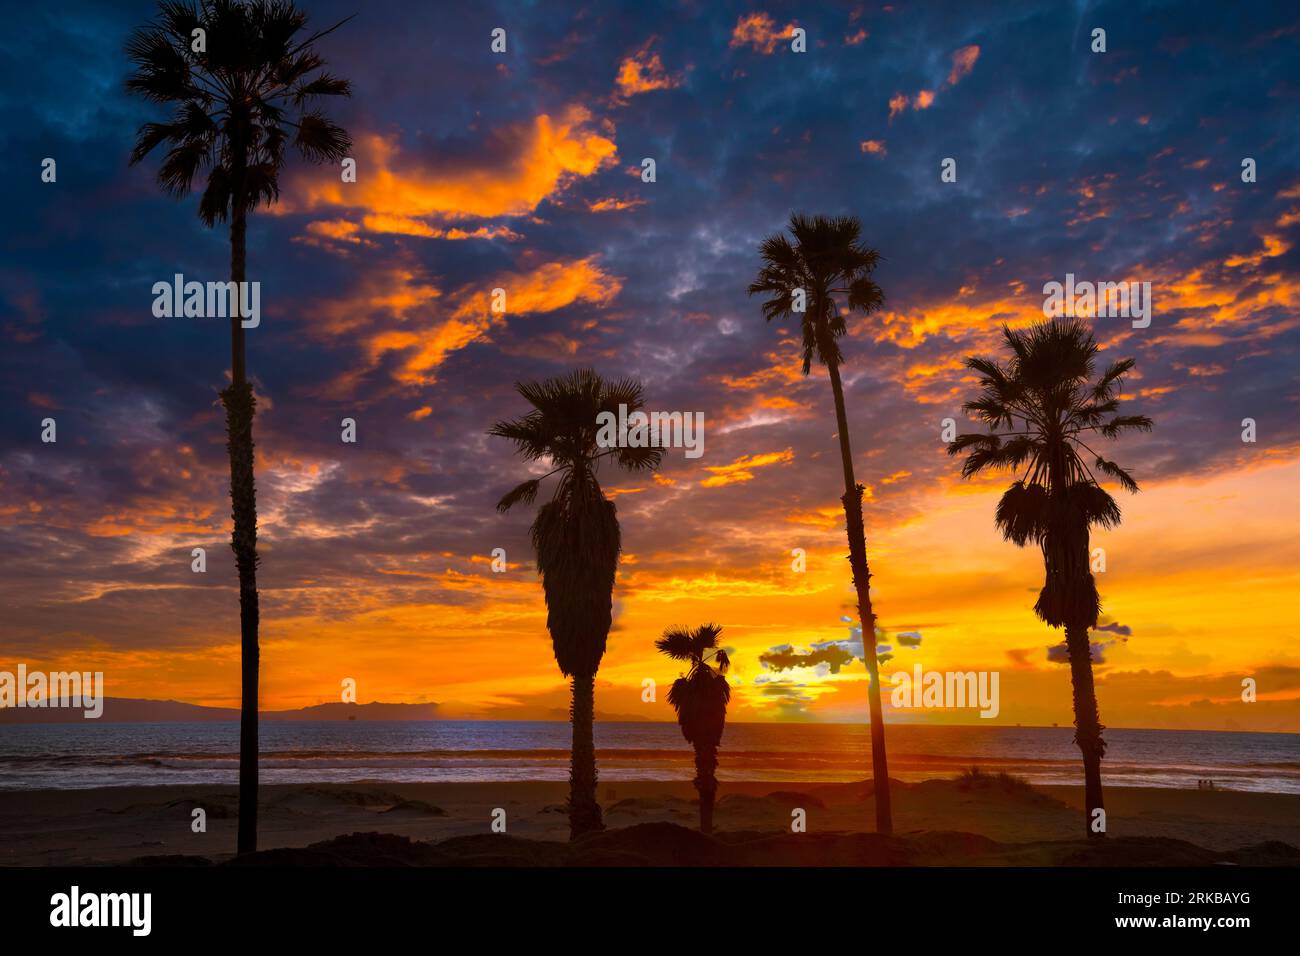 Palms and beach, Channel Islands National Park, California, Pacific Ocean Stock Photo